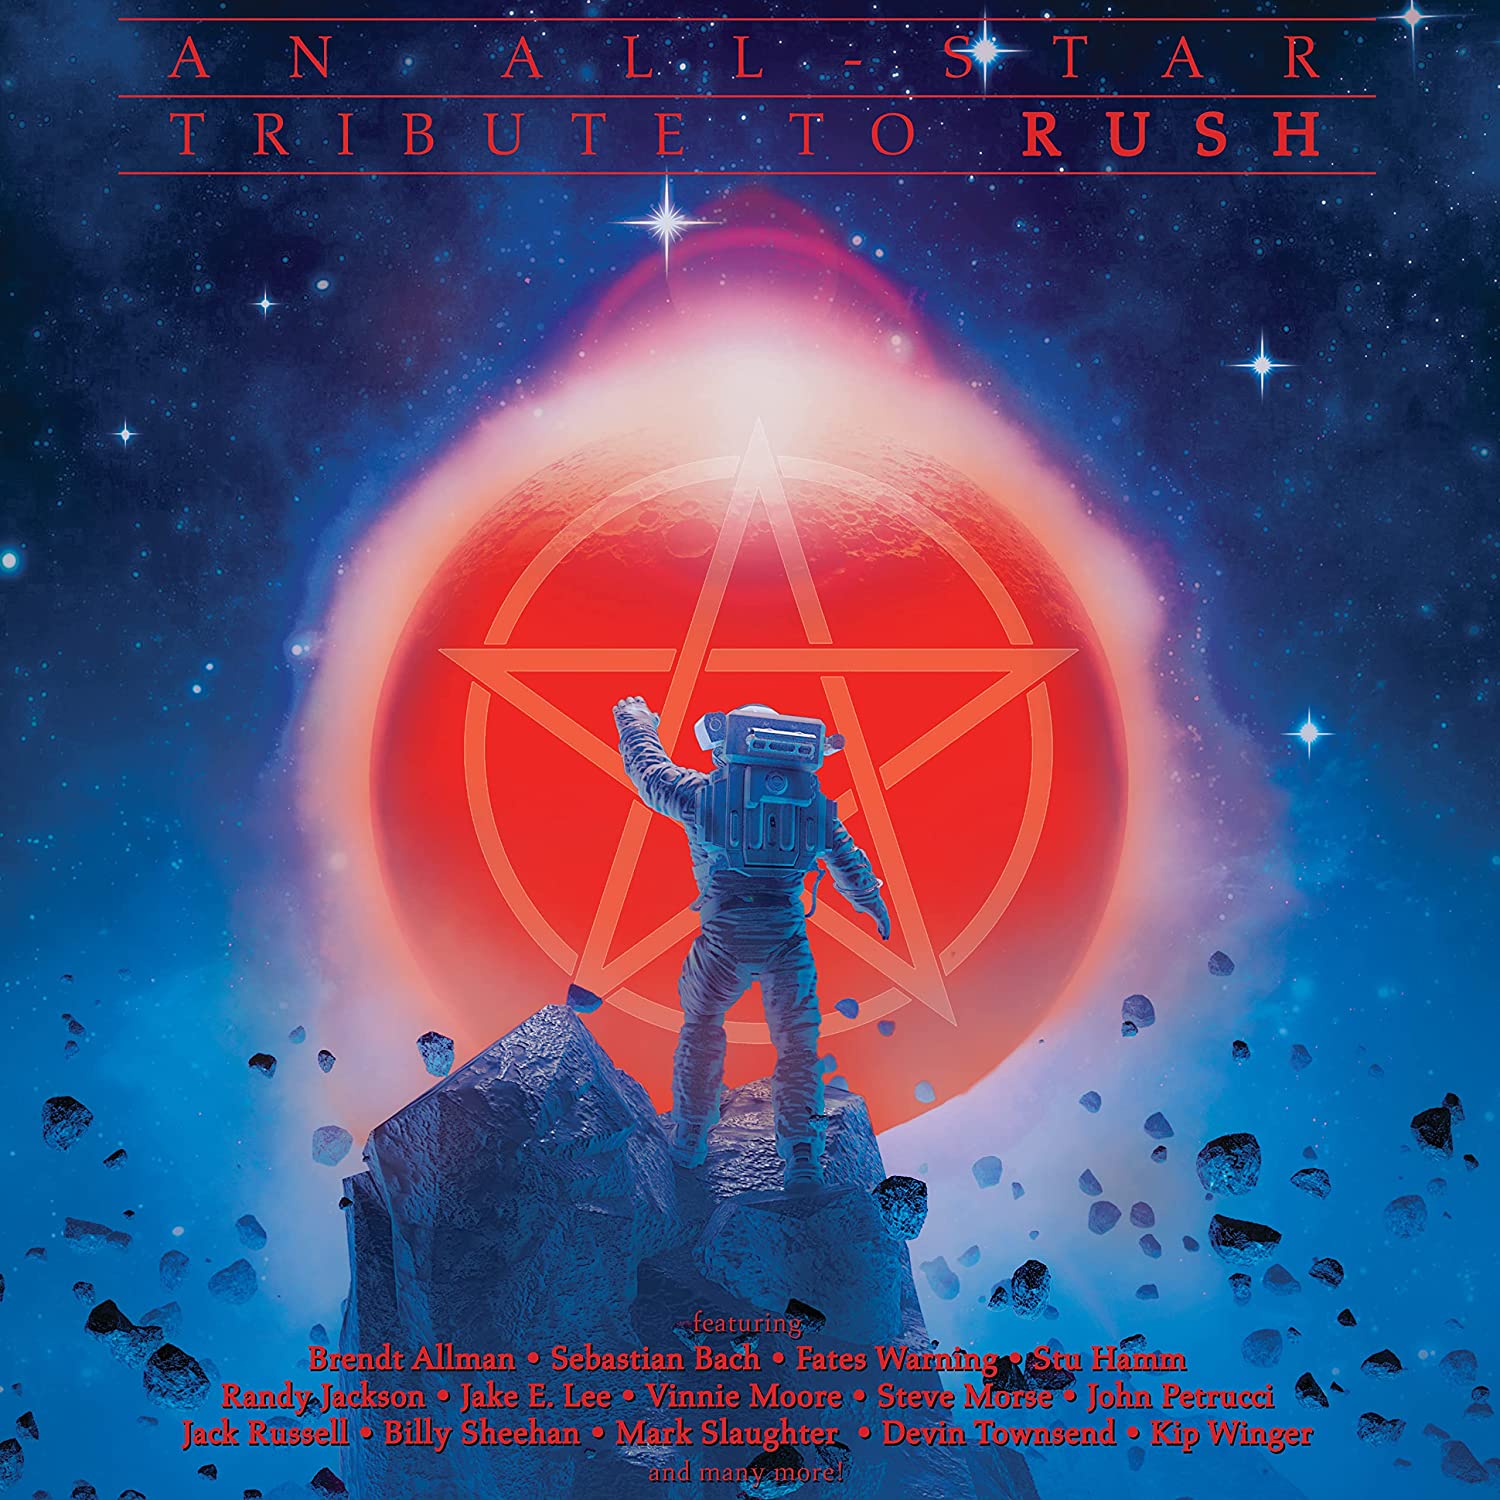 Rush is a Band Blog: All-Star Tribute To Rush featuring members of Dream  Theater, Deep Purple, Skid Row coming this June